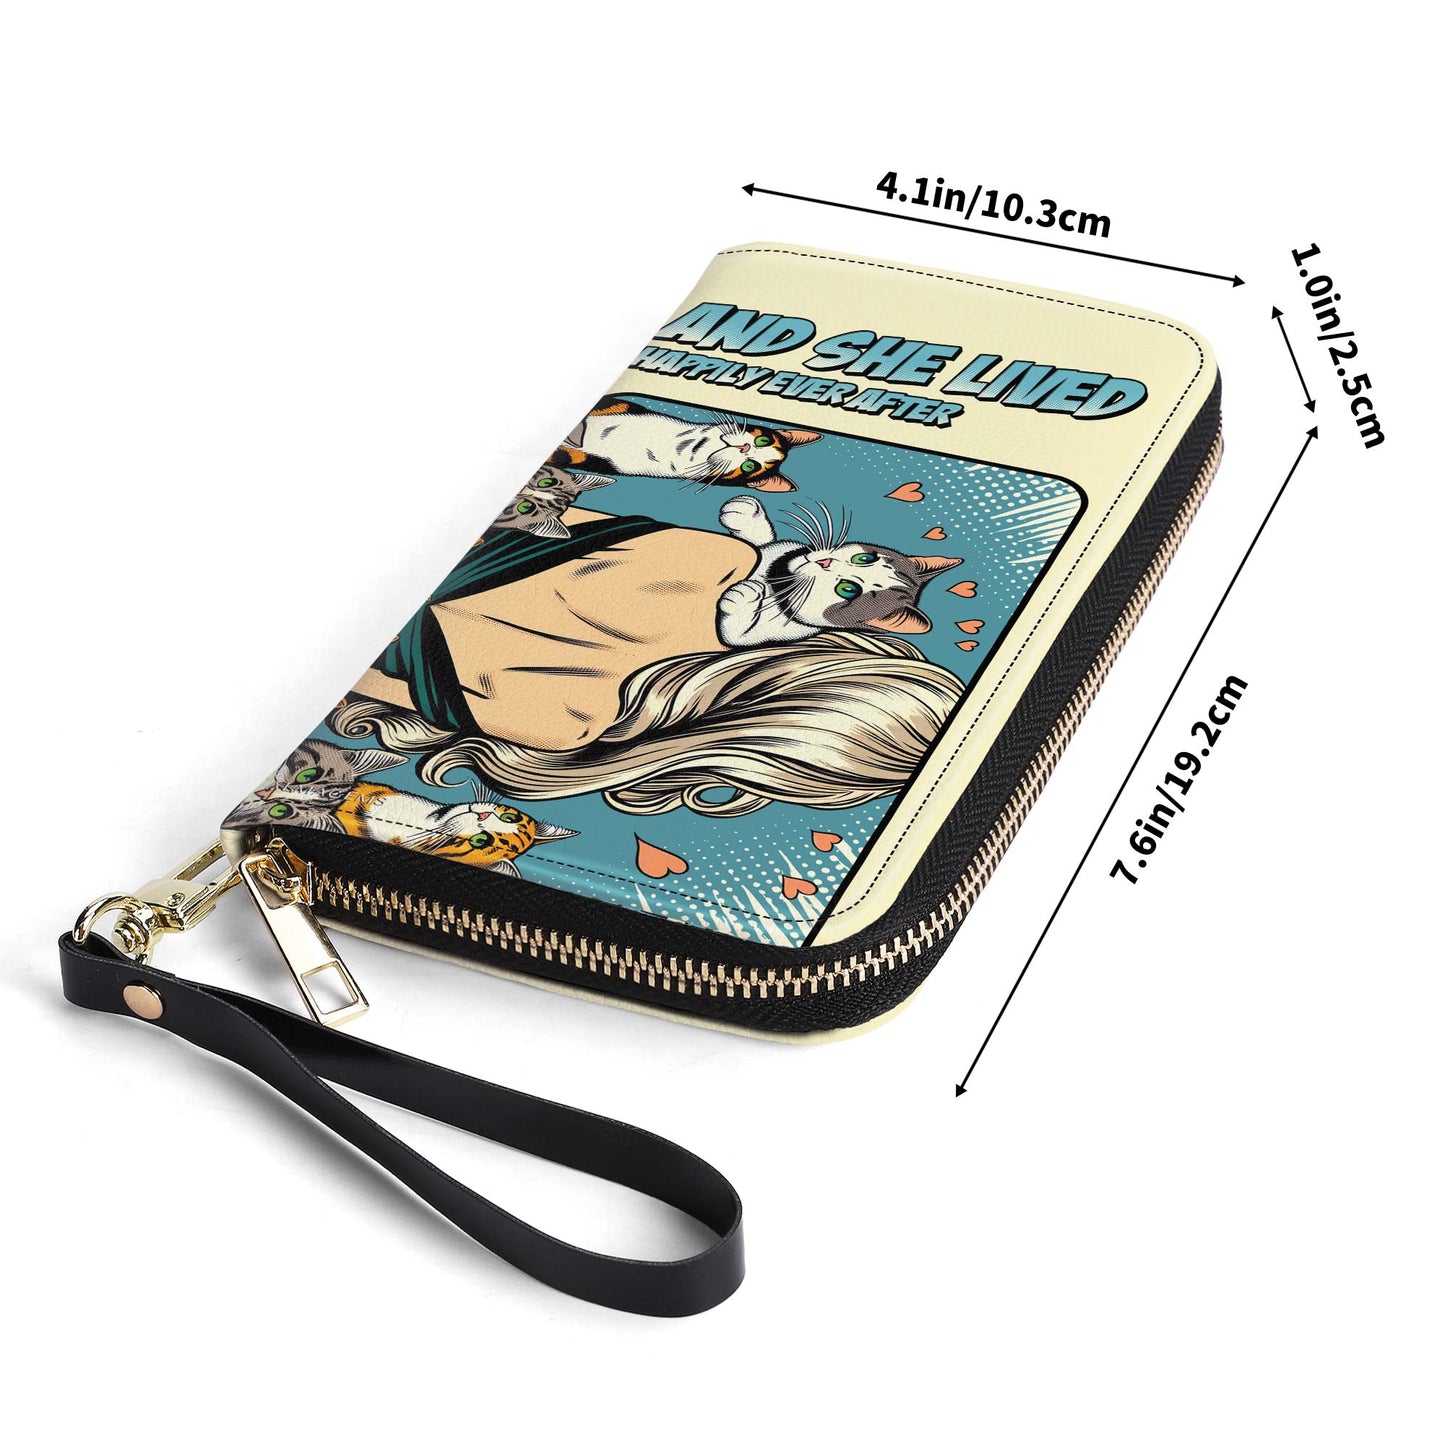 And She Lived Happily Ever After - Leather Wallet For Cat Lovers - LL04WL